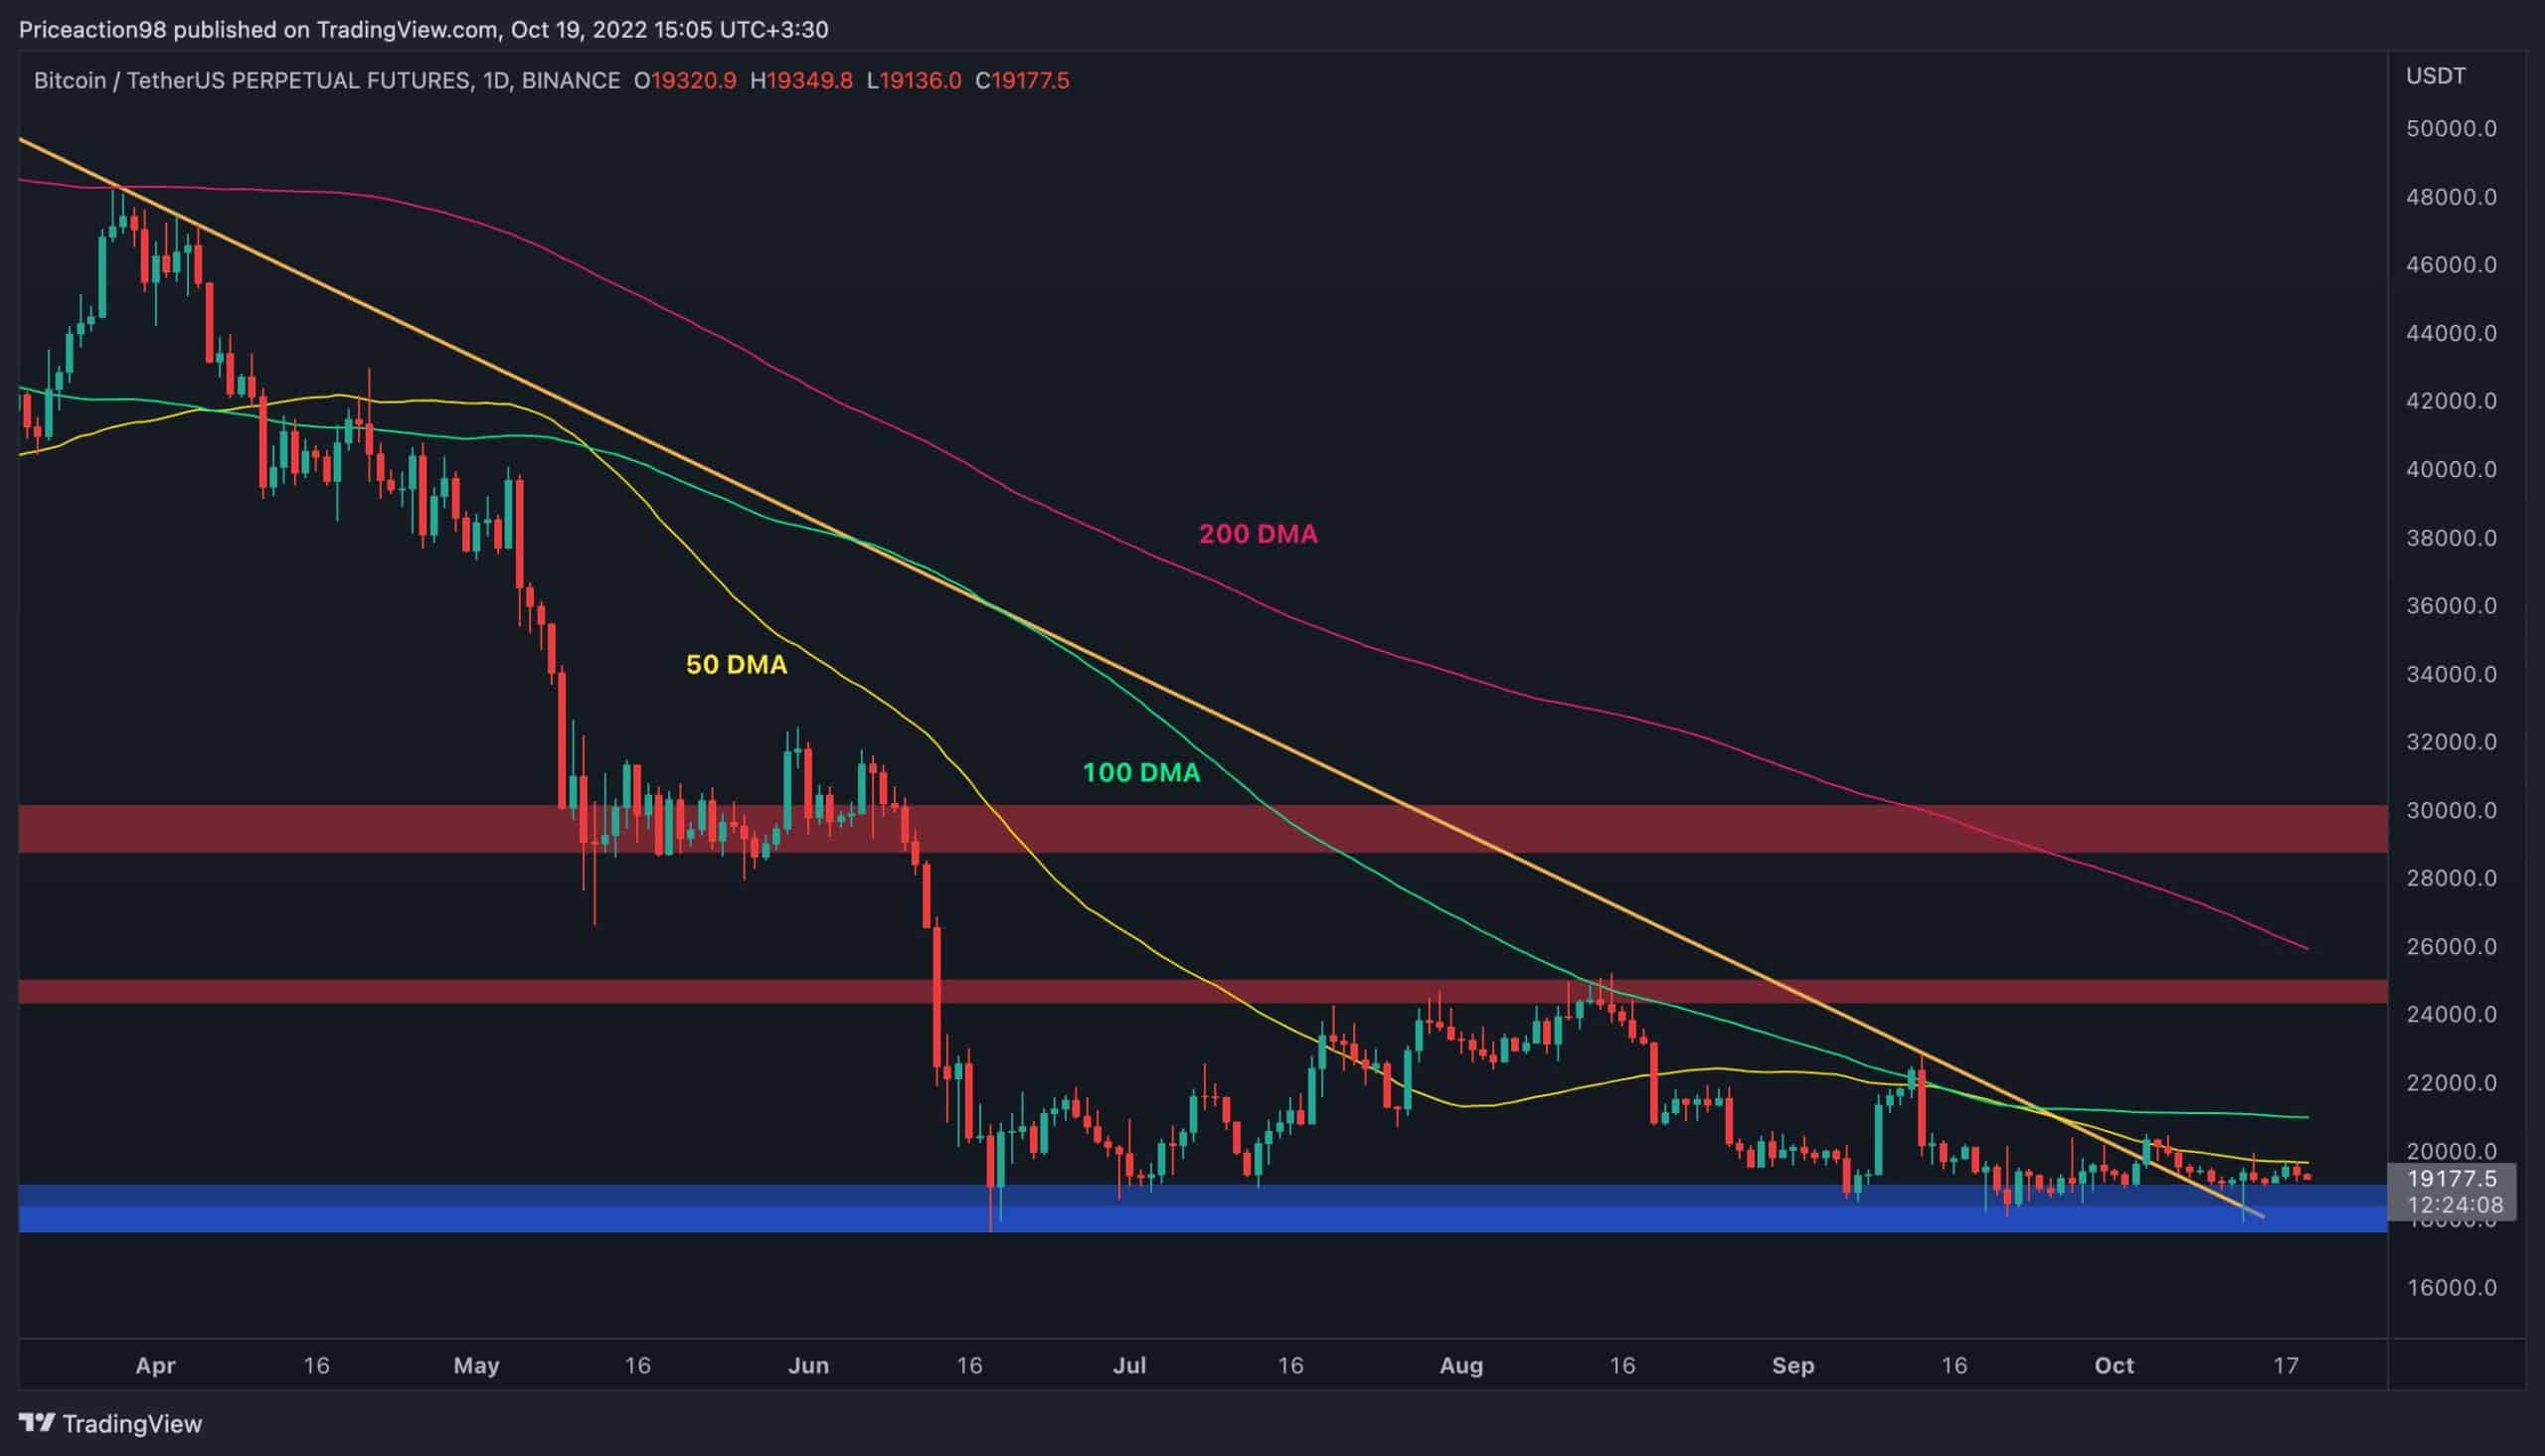 Btc-rejected-at-$20k,-is-$18,000-the-next-target-for-bears?-(bitcoin-price-analysis)